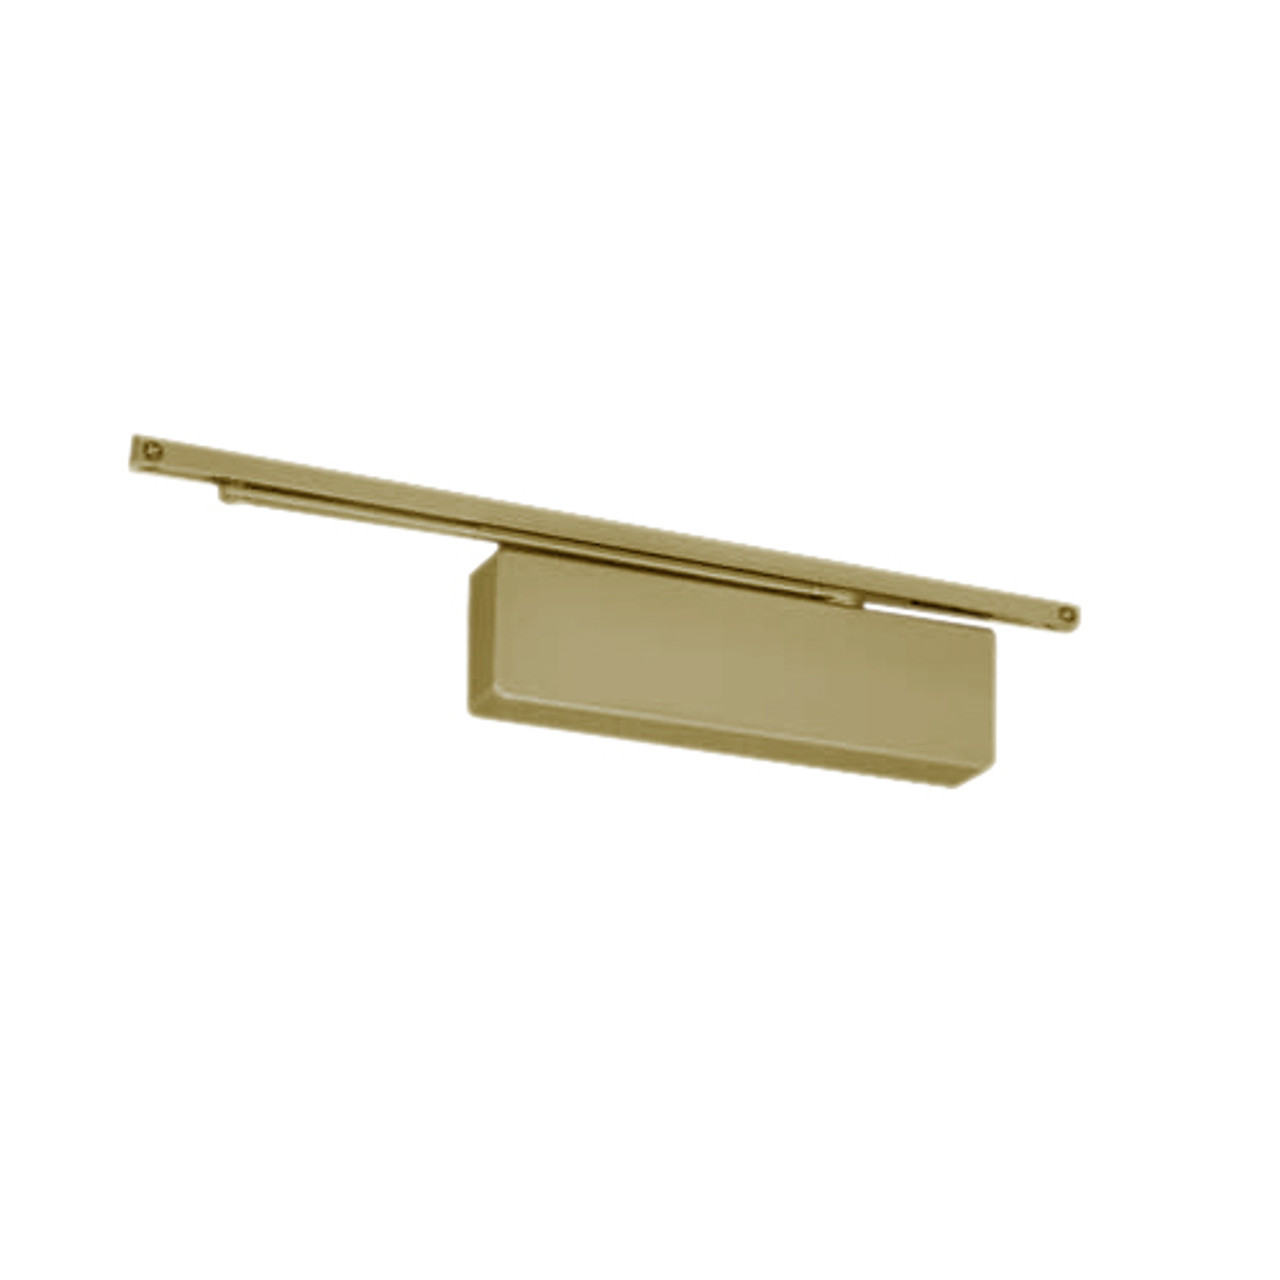 7570STDA-696-RH Norton 7570 Series Security Door Closer with Pull Side Slide Track Arm in Gold Finish